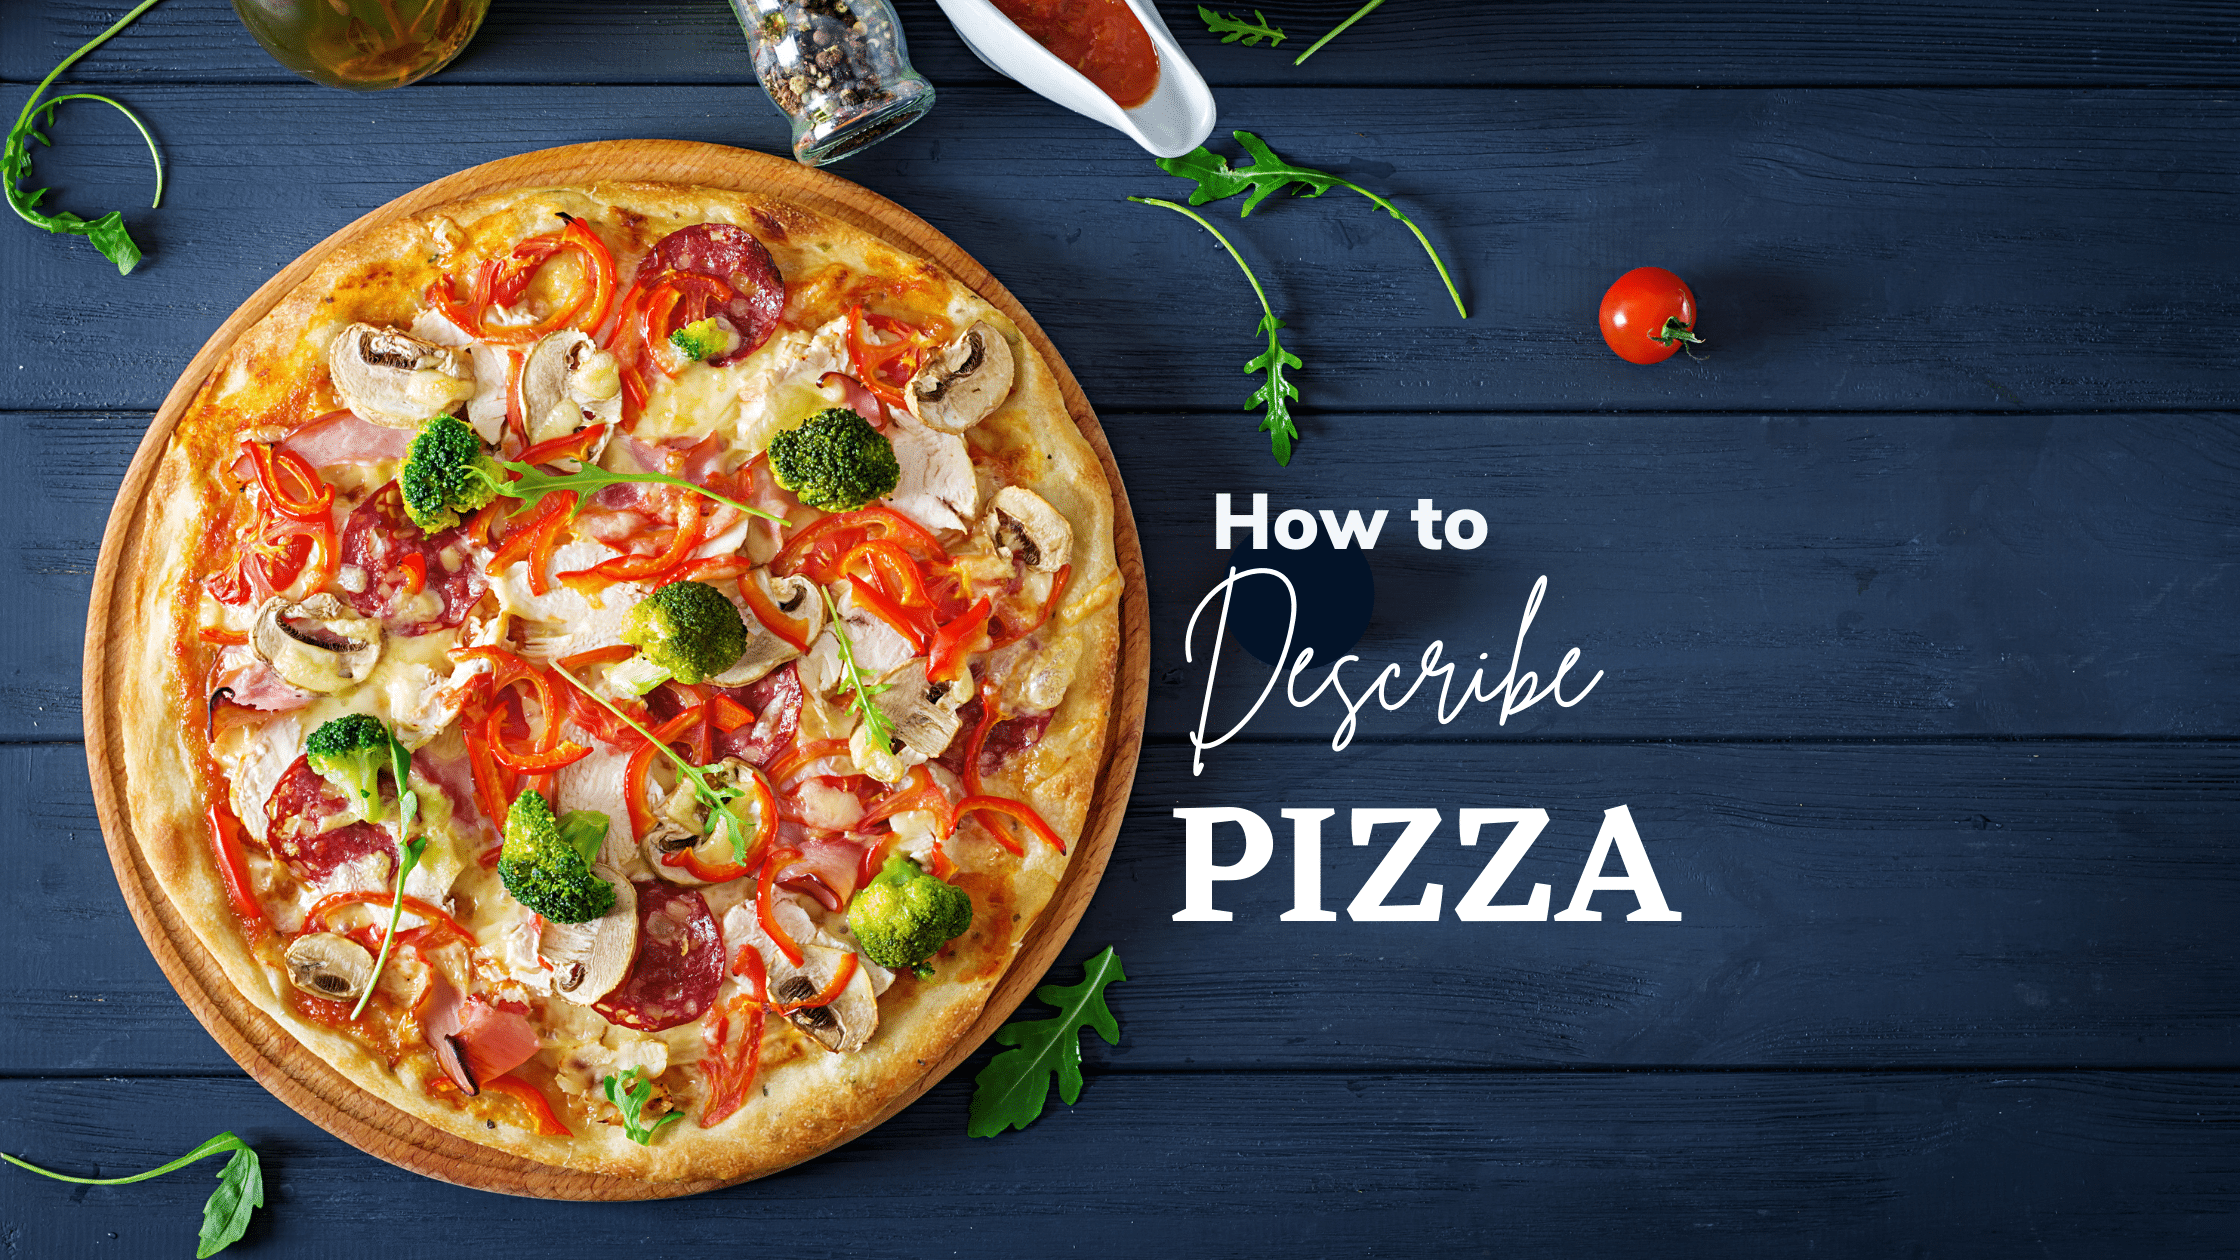 7 Steps on How to Describe Pizza that Will Make Your Readers Drool